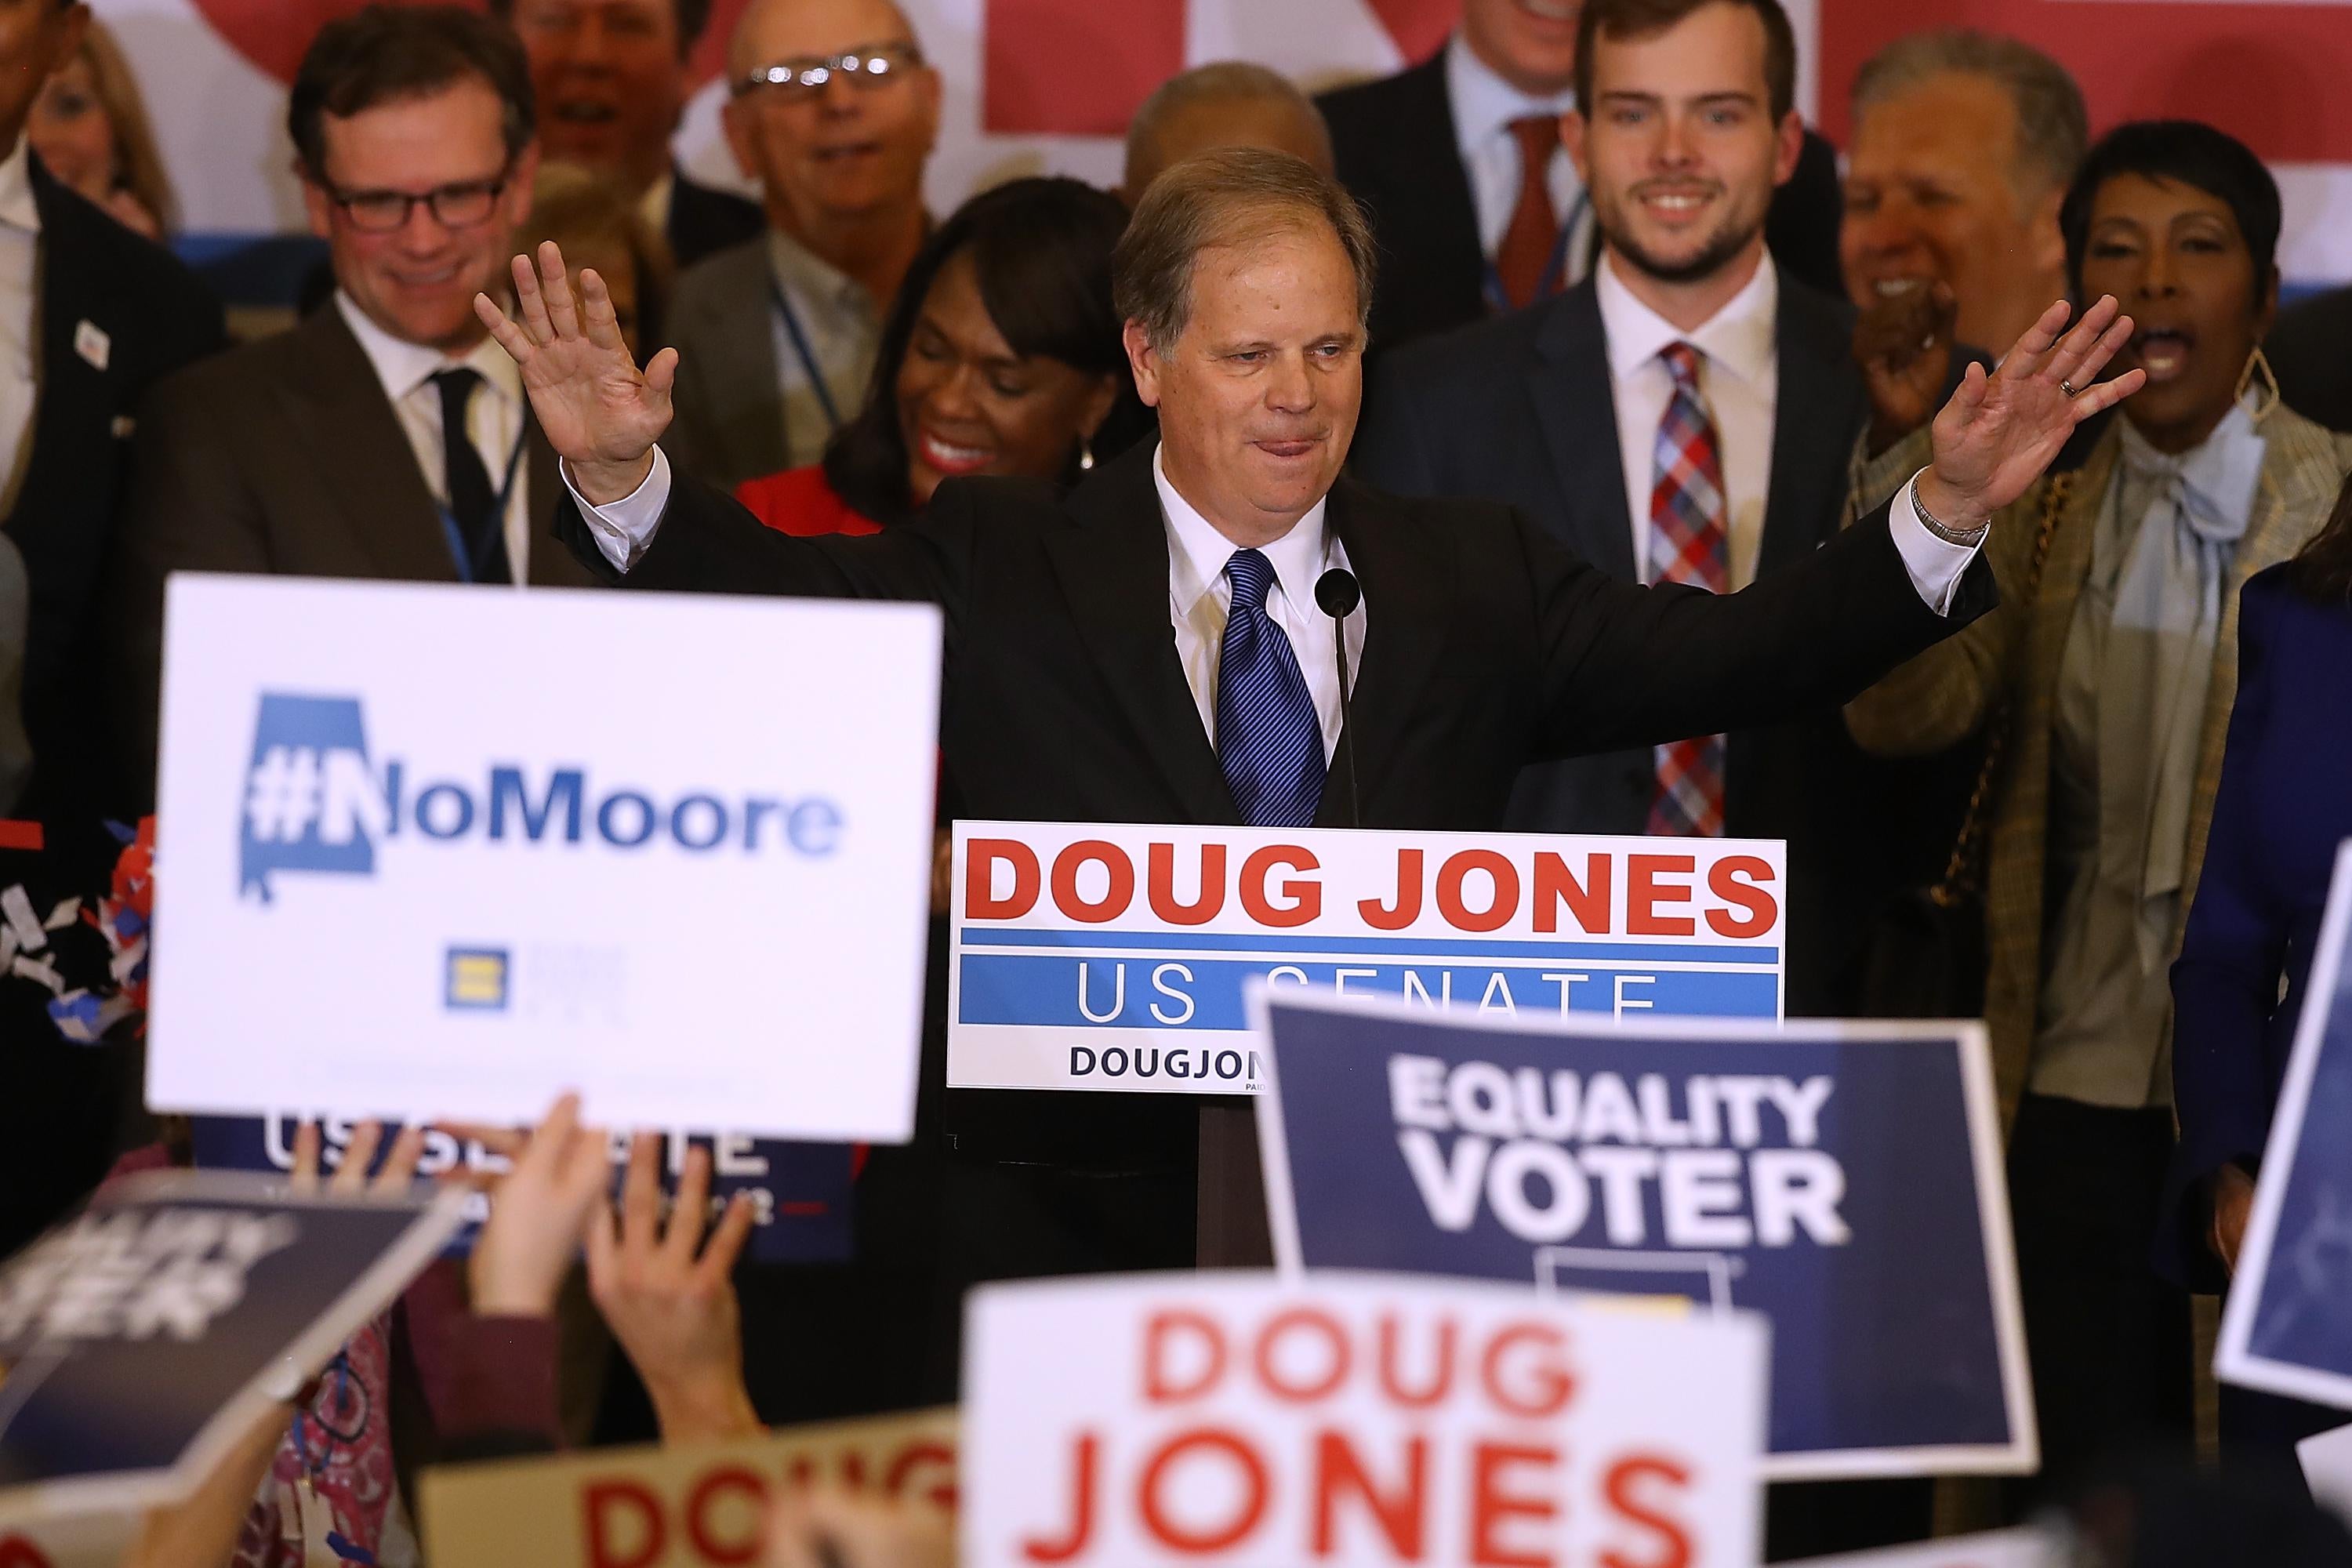 BIRMINGHAM, AL - DECEMBER 12:  Democratic U.S. Senator elect Doug Jones speaks to supporters during his election night gathering the Sheraton Hotel on December 12, 2017 in Birmingham, Alabama.  Doug Jones defeated his republican challenger Roy Moore to claim Alabama's U.S. Senate seat that was vacated by attorney general Jeff Sessions. (Photo by Justin Sullivan/Getty Images)